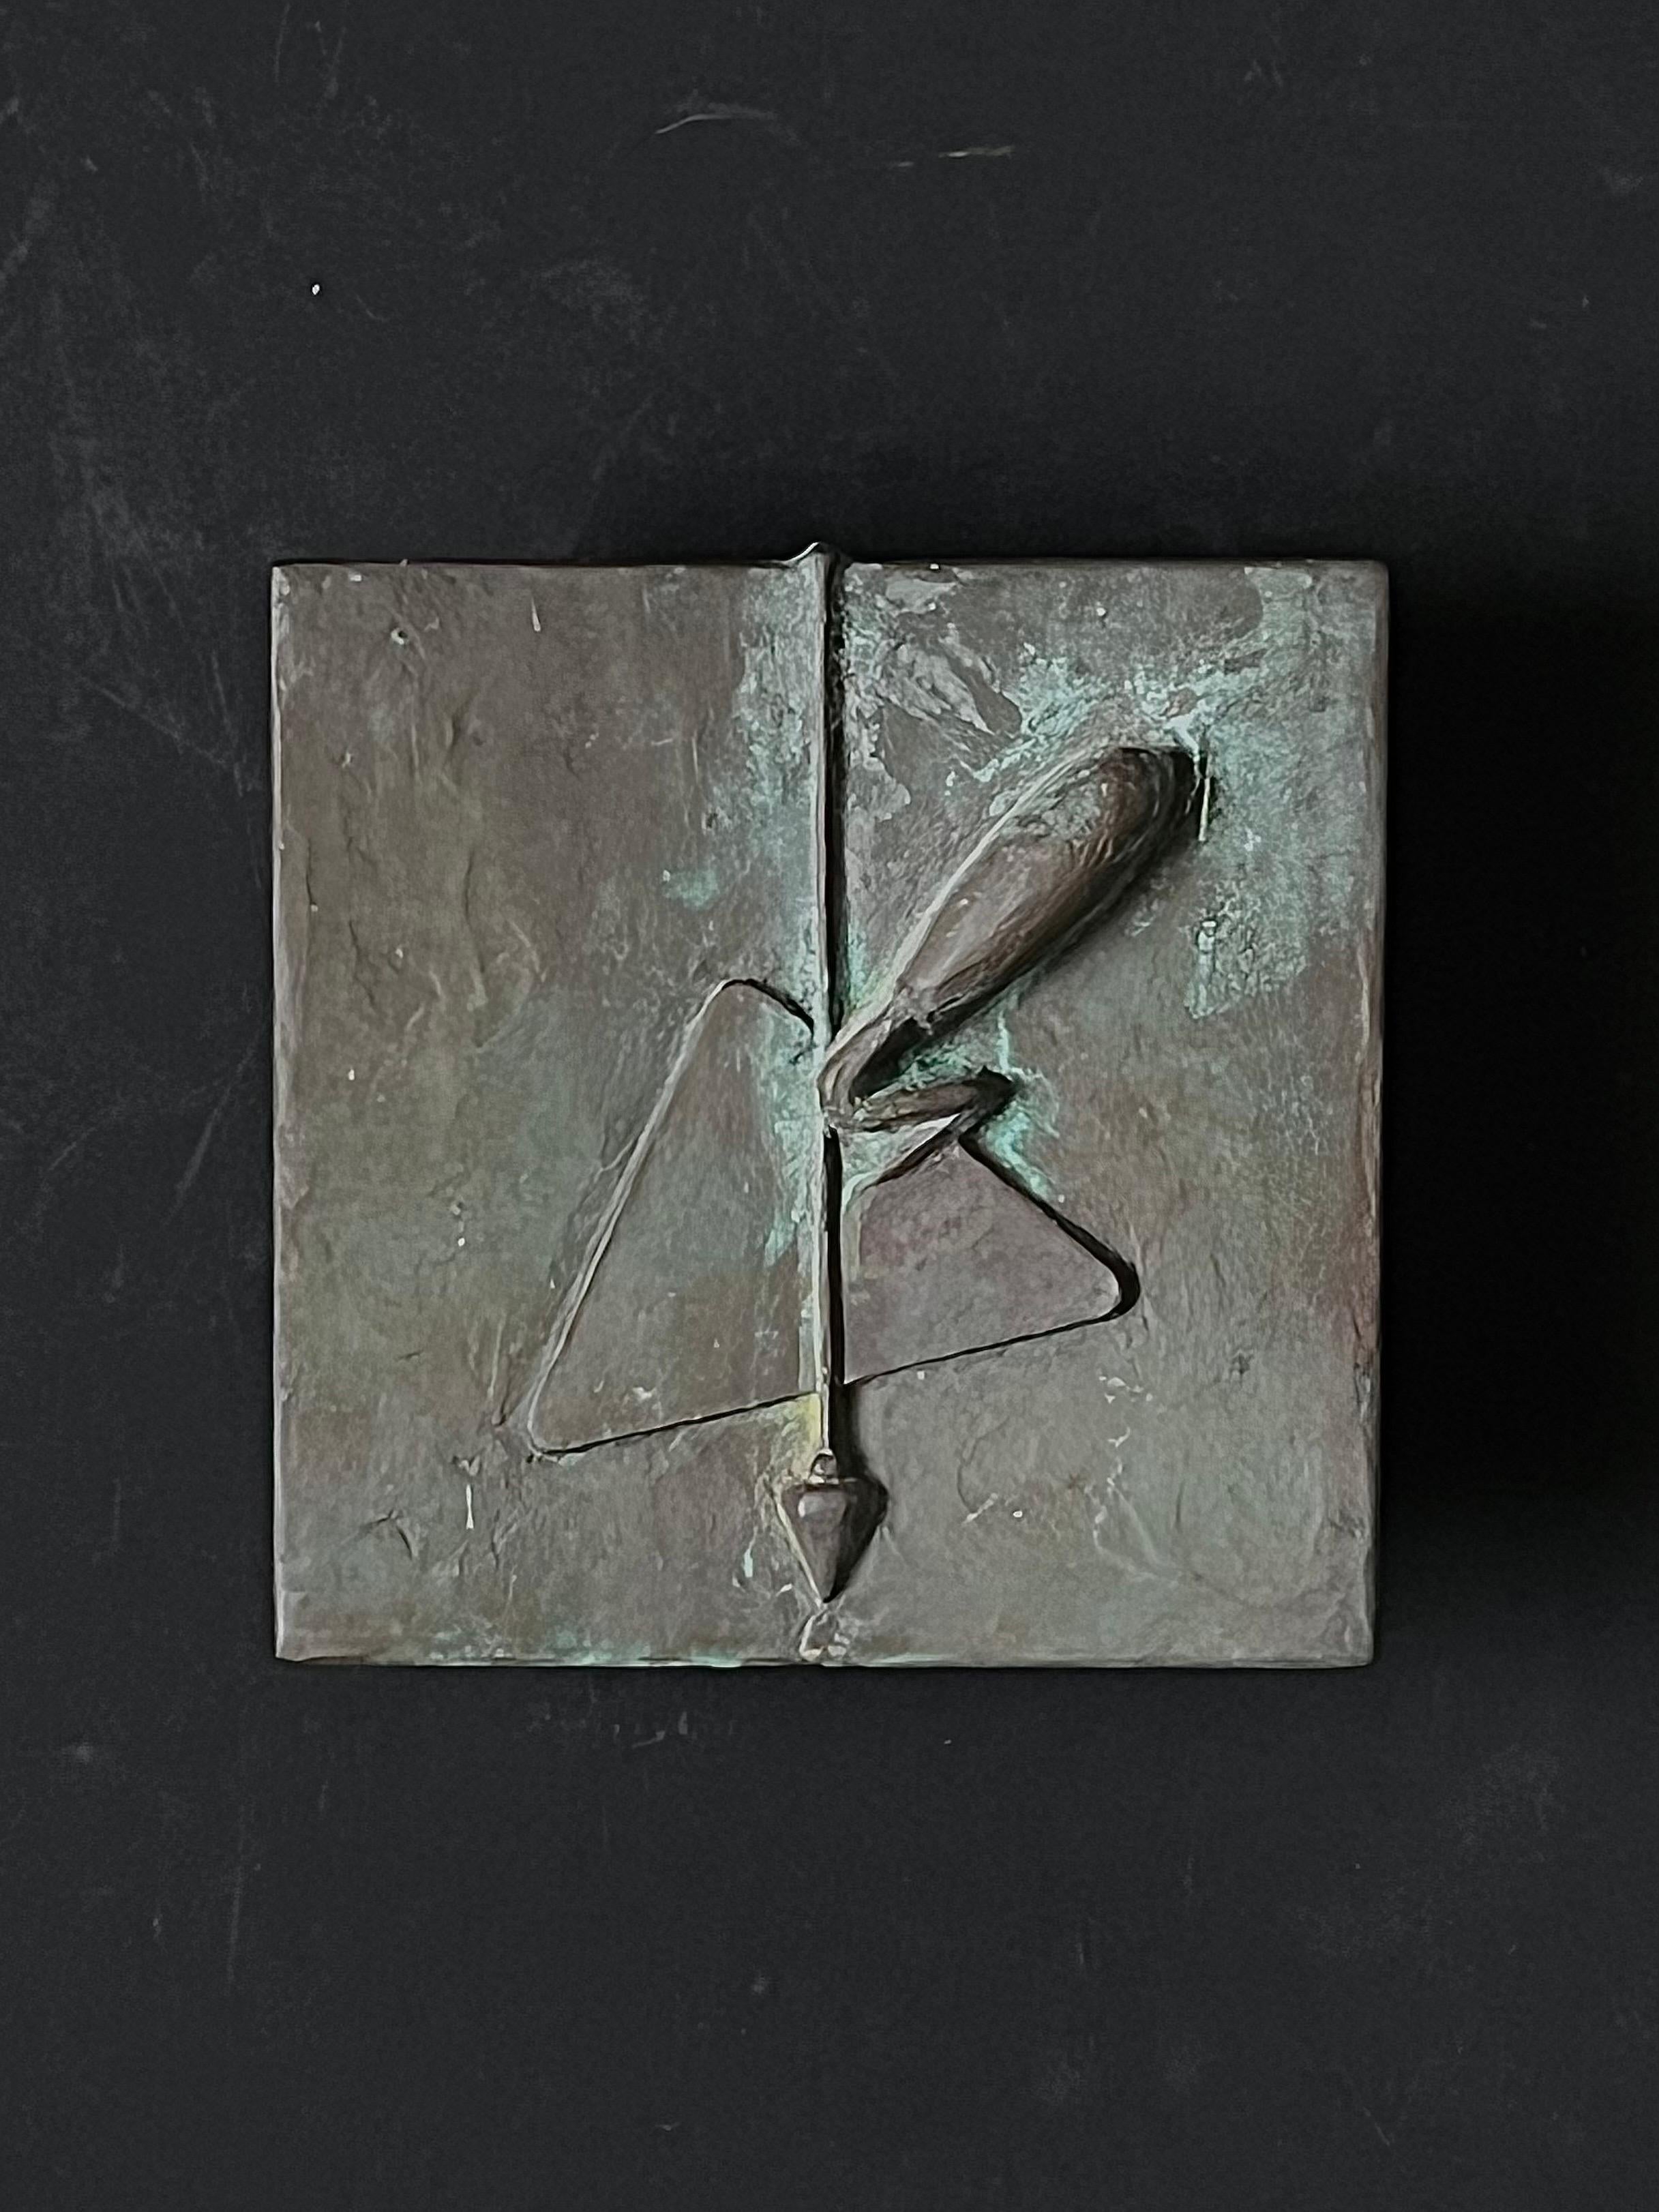 A square push-pull door handle made of bronze featuring a raised design of simple architectural tools. 20th century design, found in Germany.

The piece is in good vintage condition with a dark brown colour to the metal. There are signs of wear in